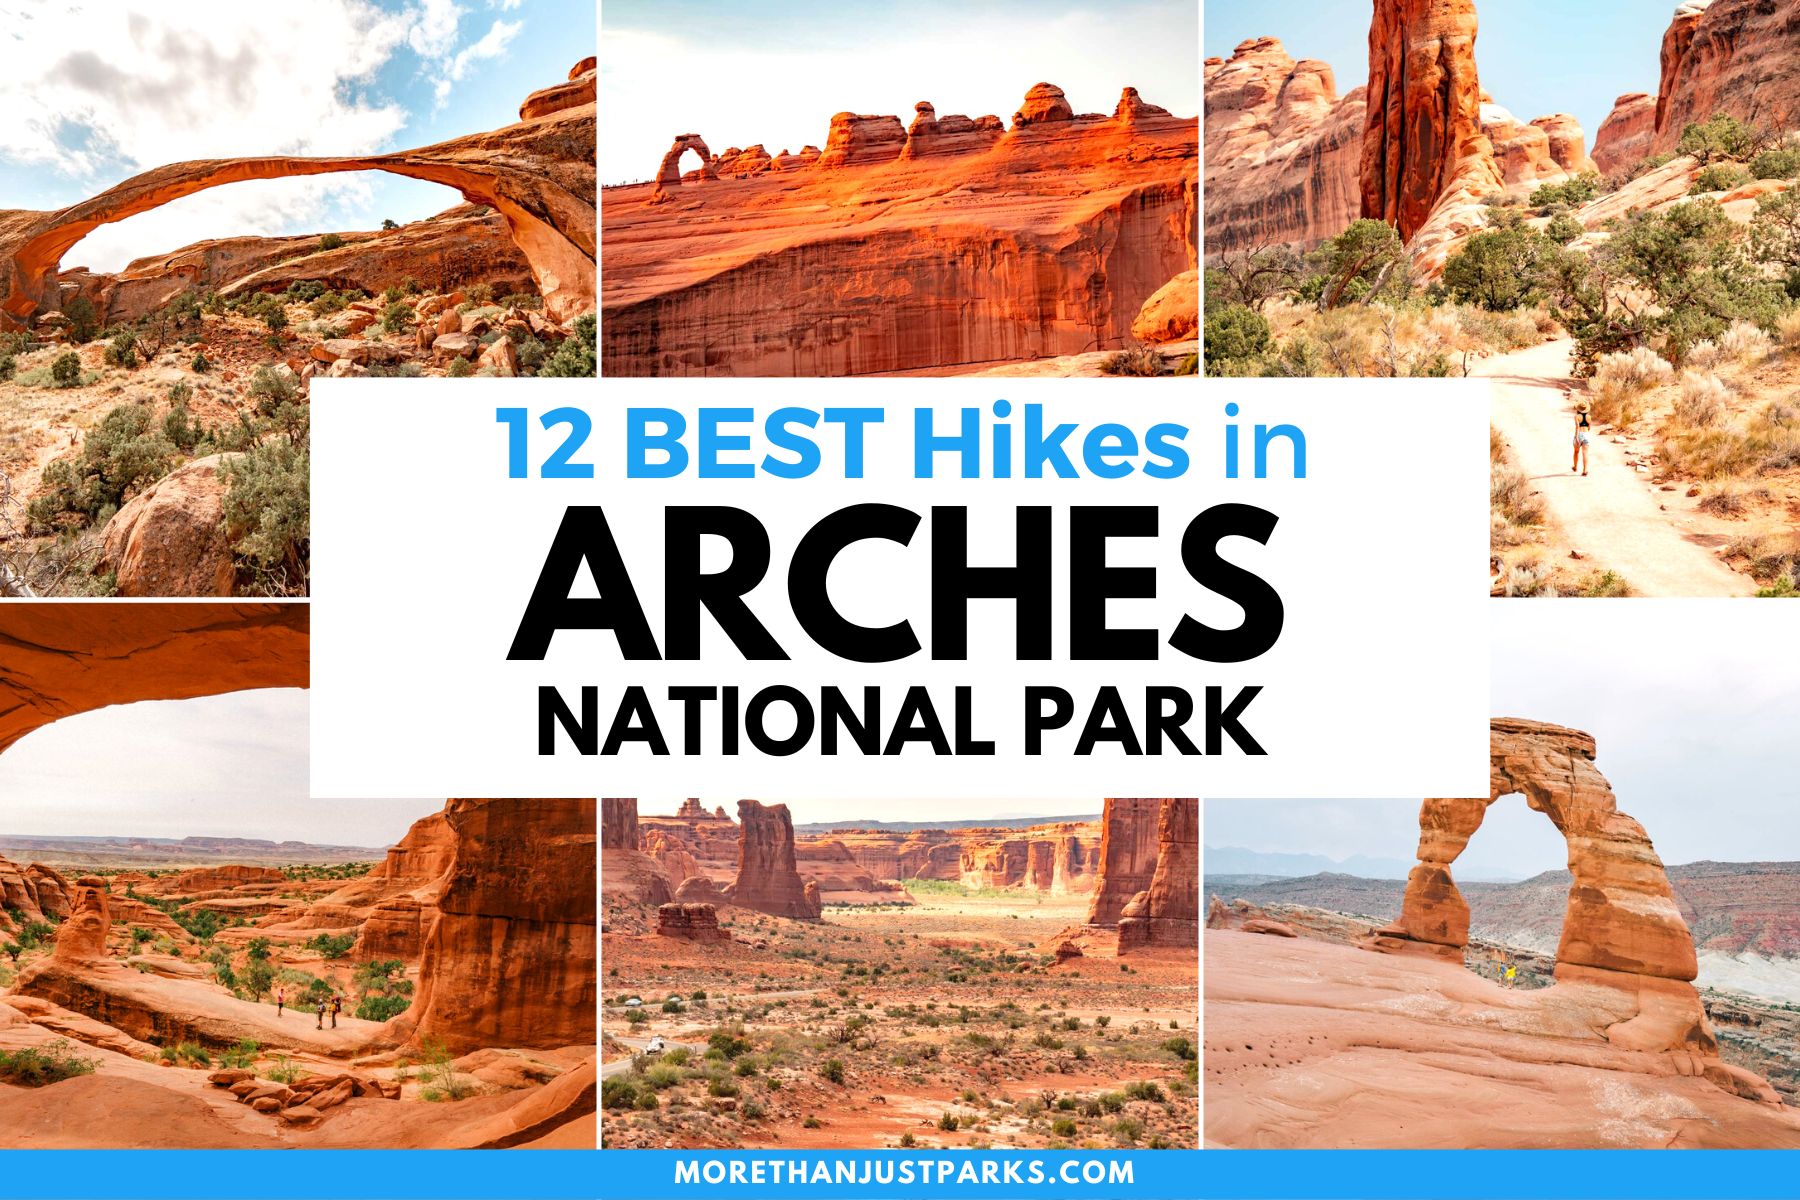 best hikes in arches national park, hiking in arches national park